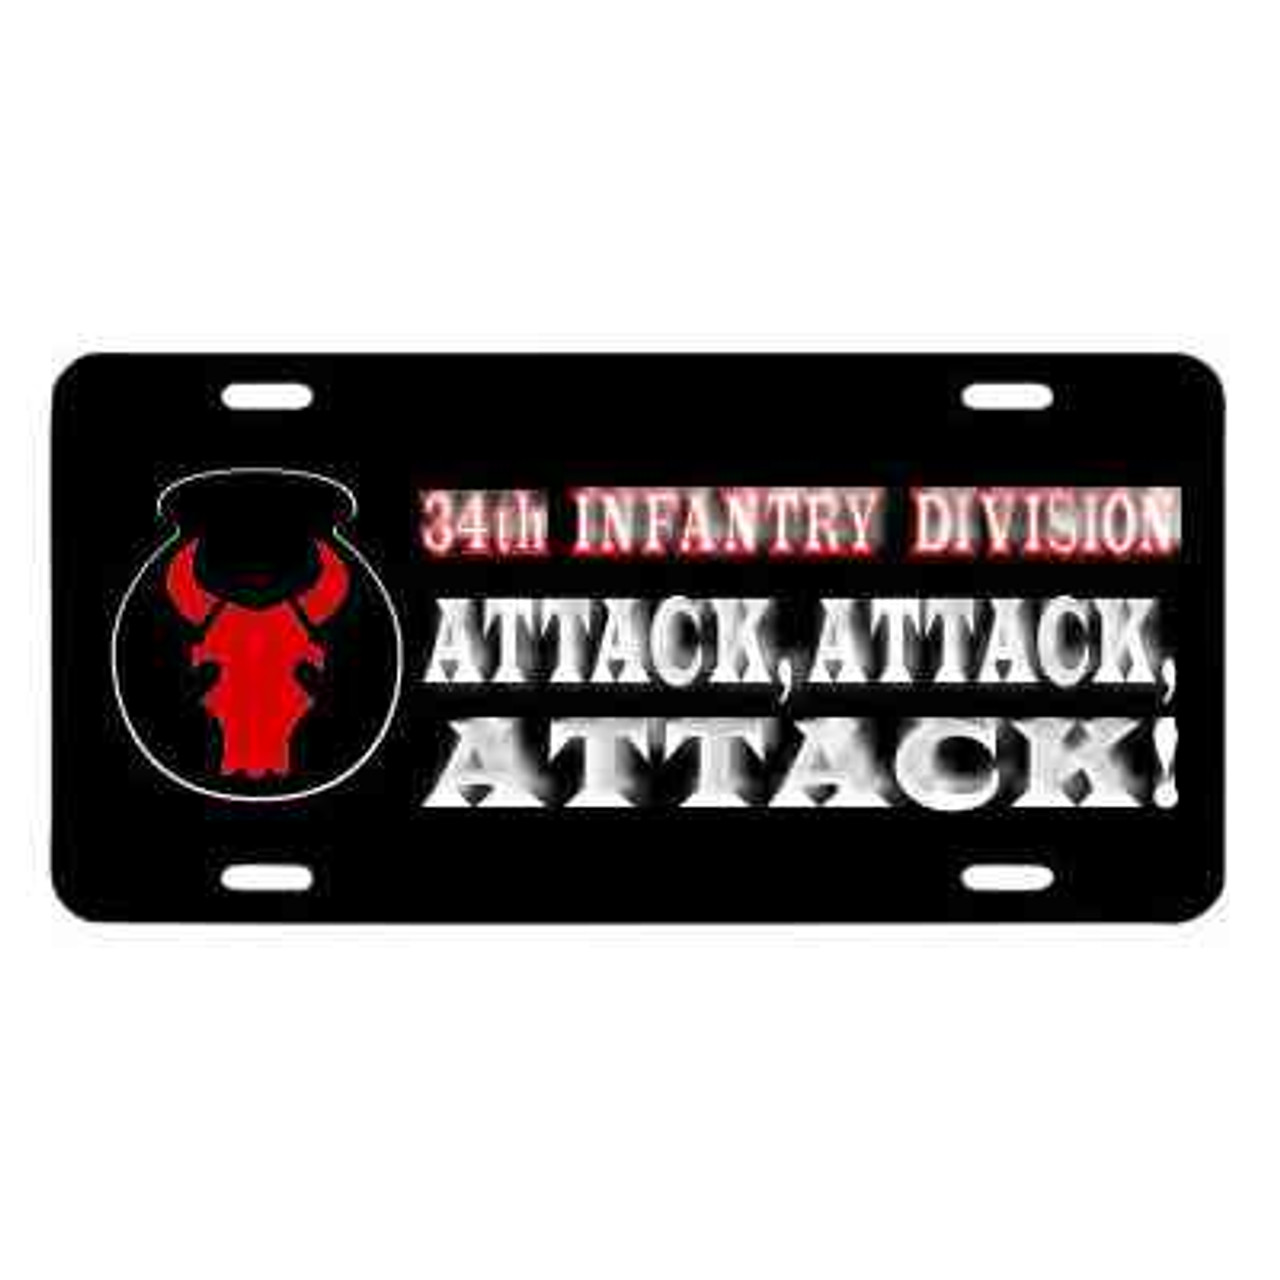 army 34th infantry division motto license plate